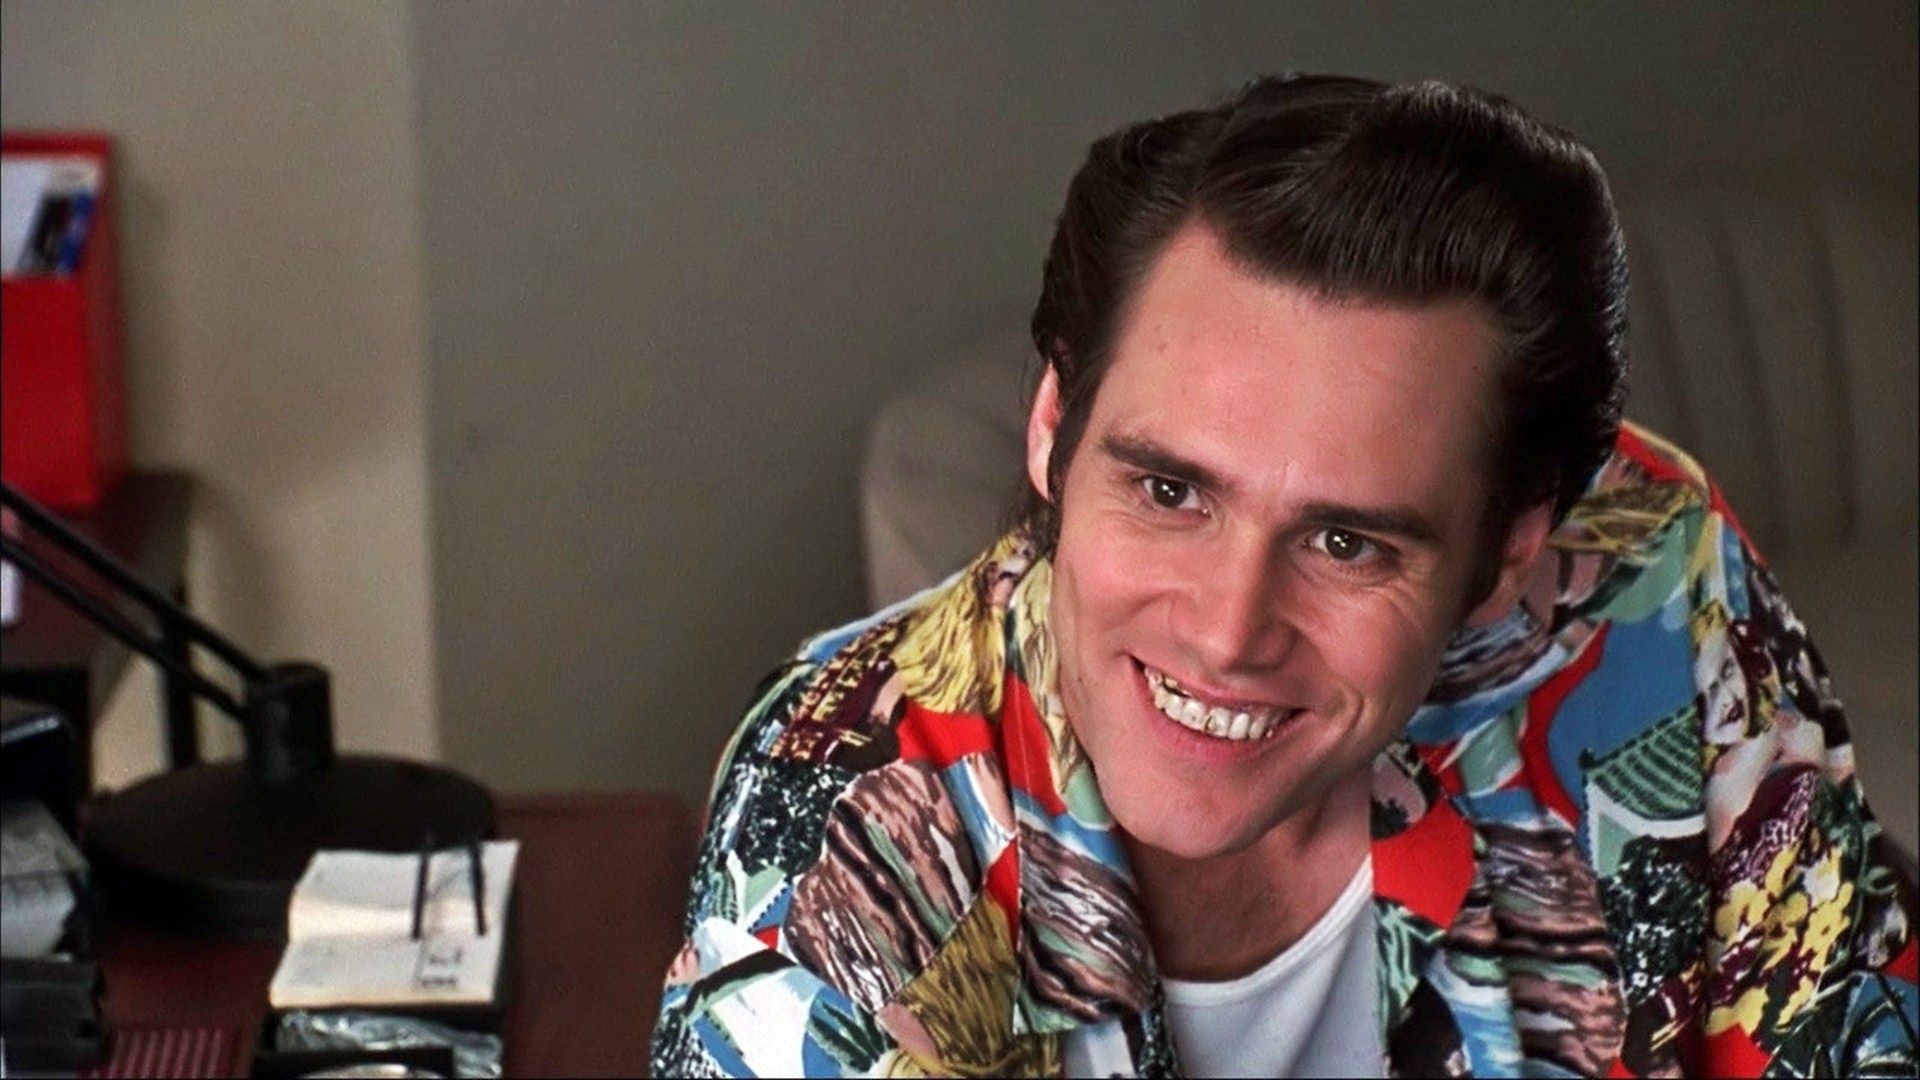 Ace Ventura: Jim Carrey, Gained recognition in 1990, A star in motion pictures. 1920x1080 Full HD Background.